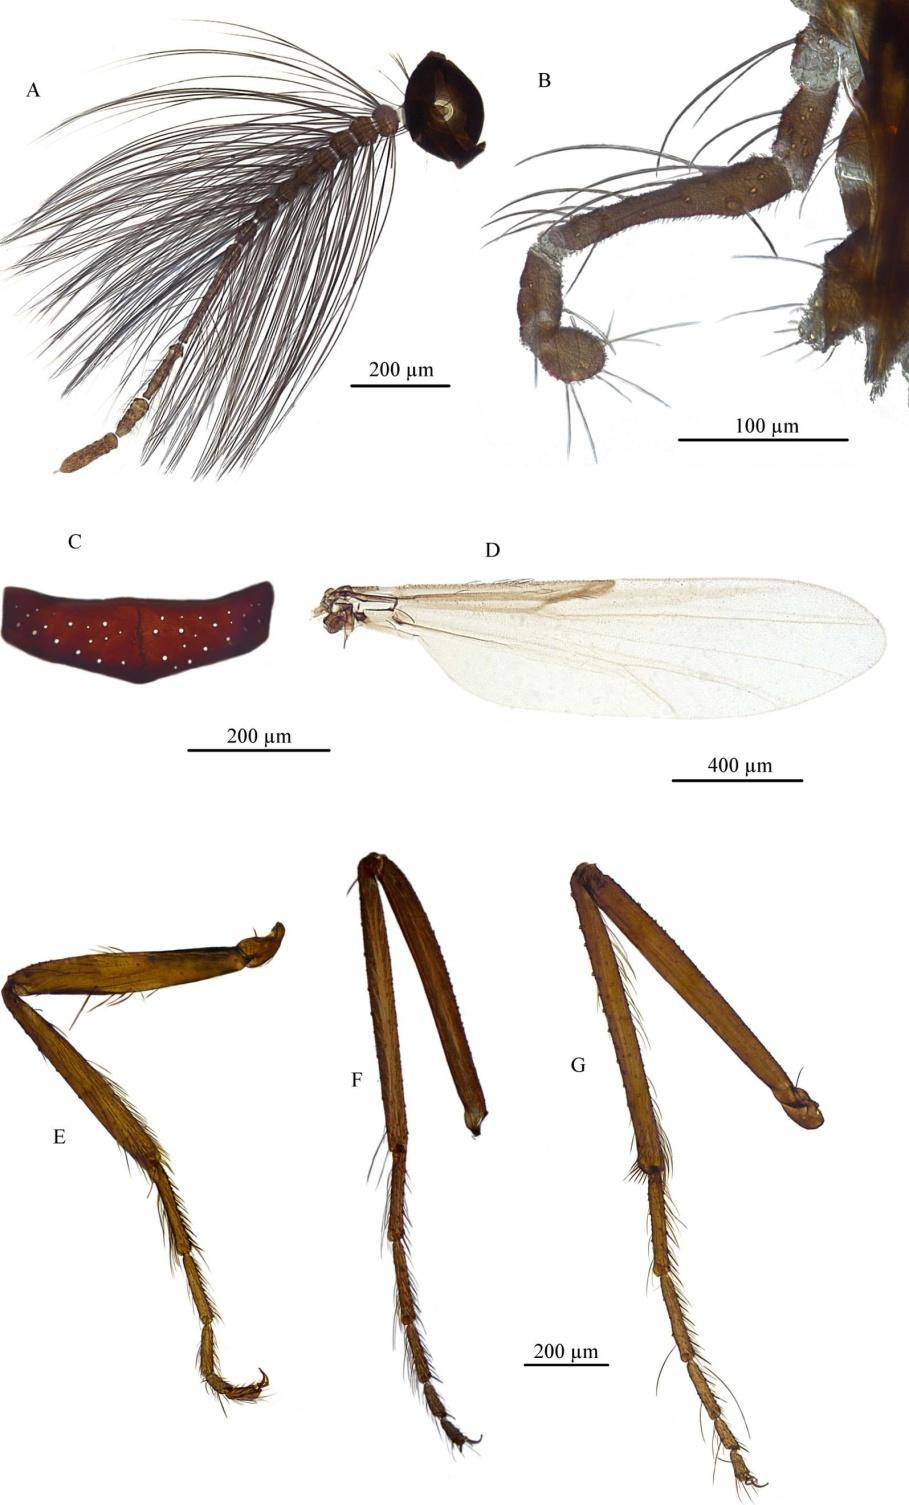 DOMINIAK P. et al.: Forcipomyia altaica in the Western Palaearctic 25